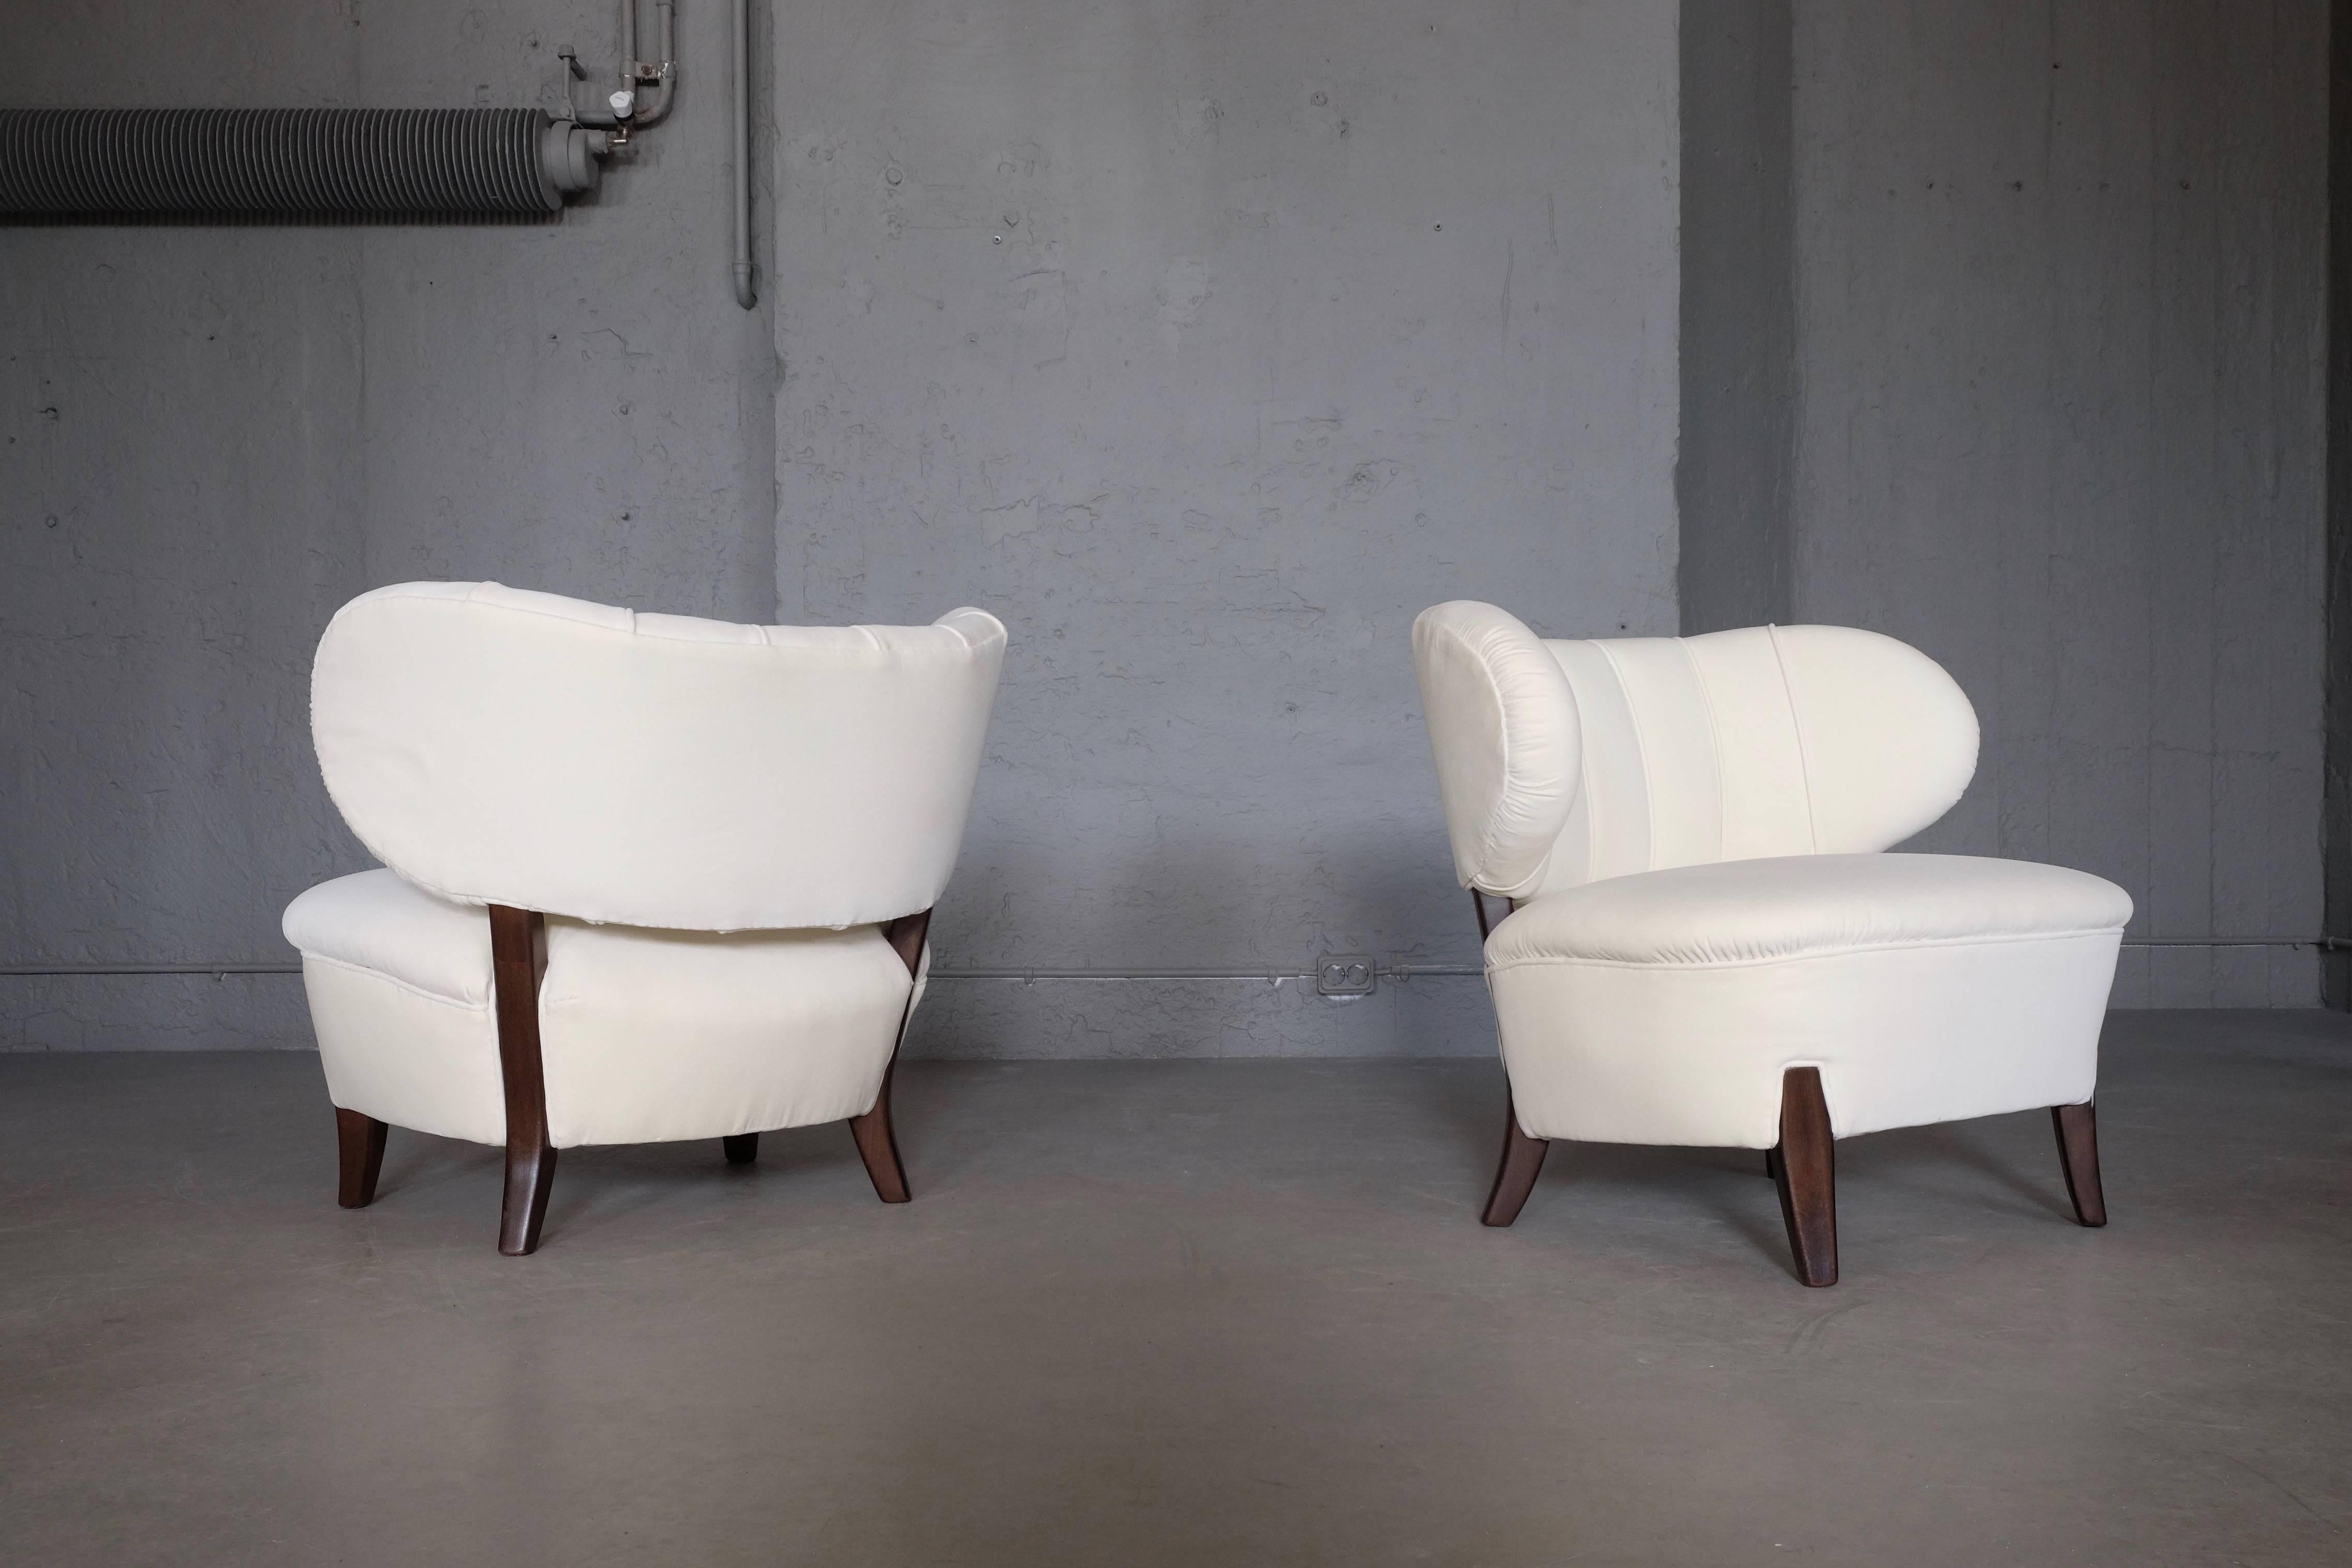 Pair of Otto Schulz Chairs, Sweden, 1930s For Sale 1